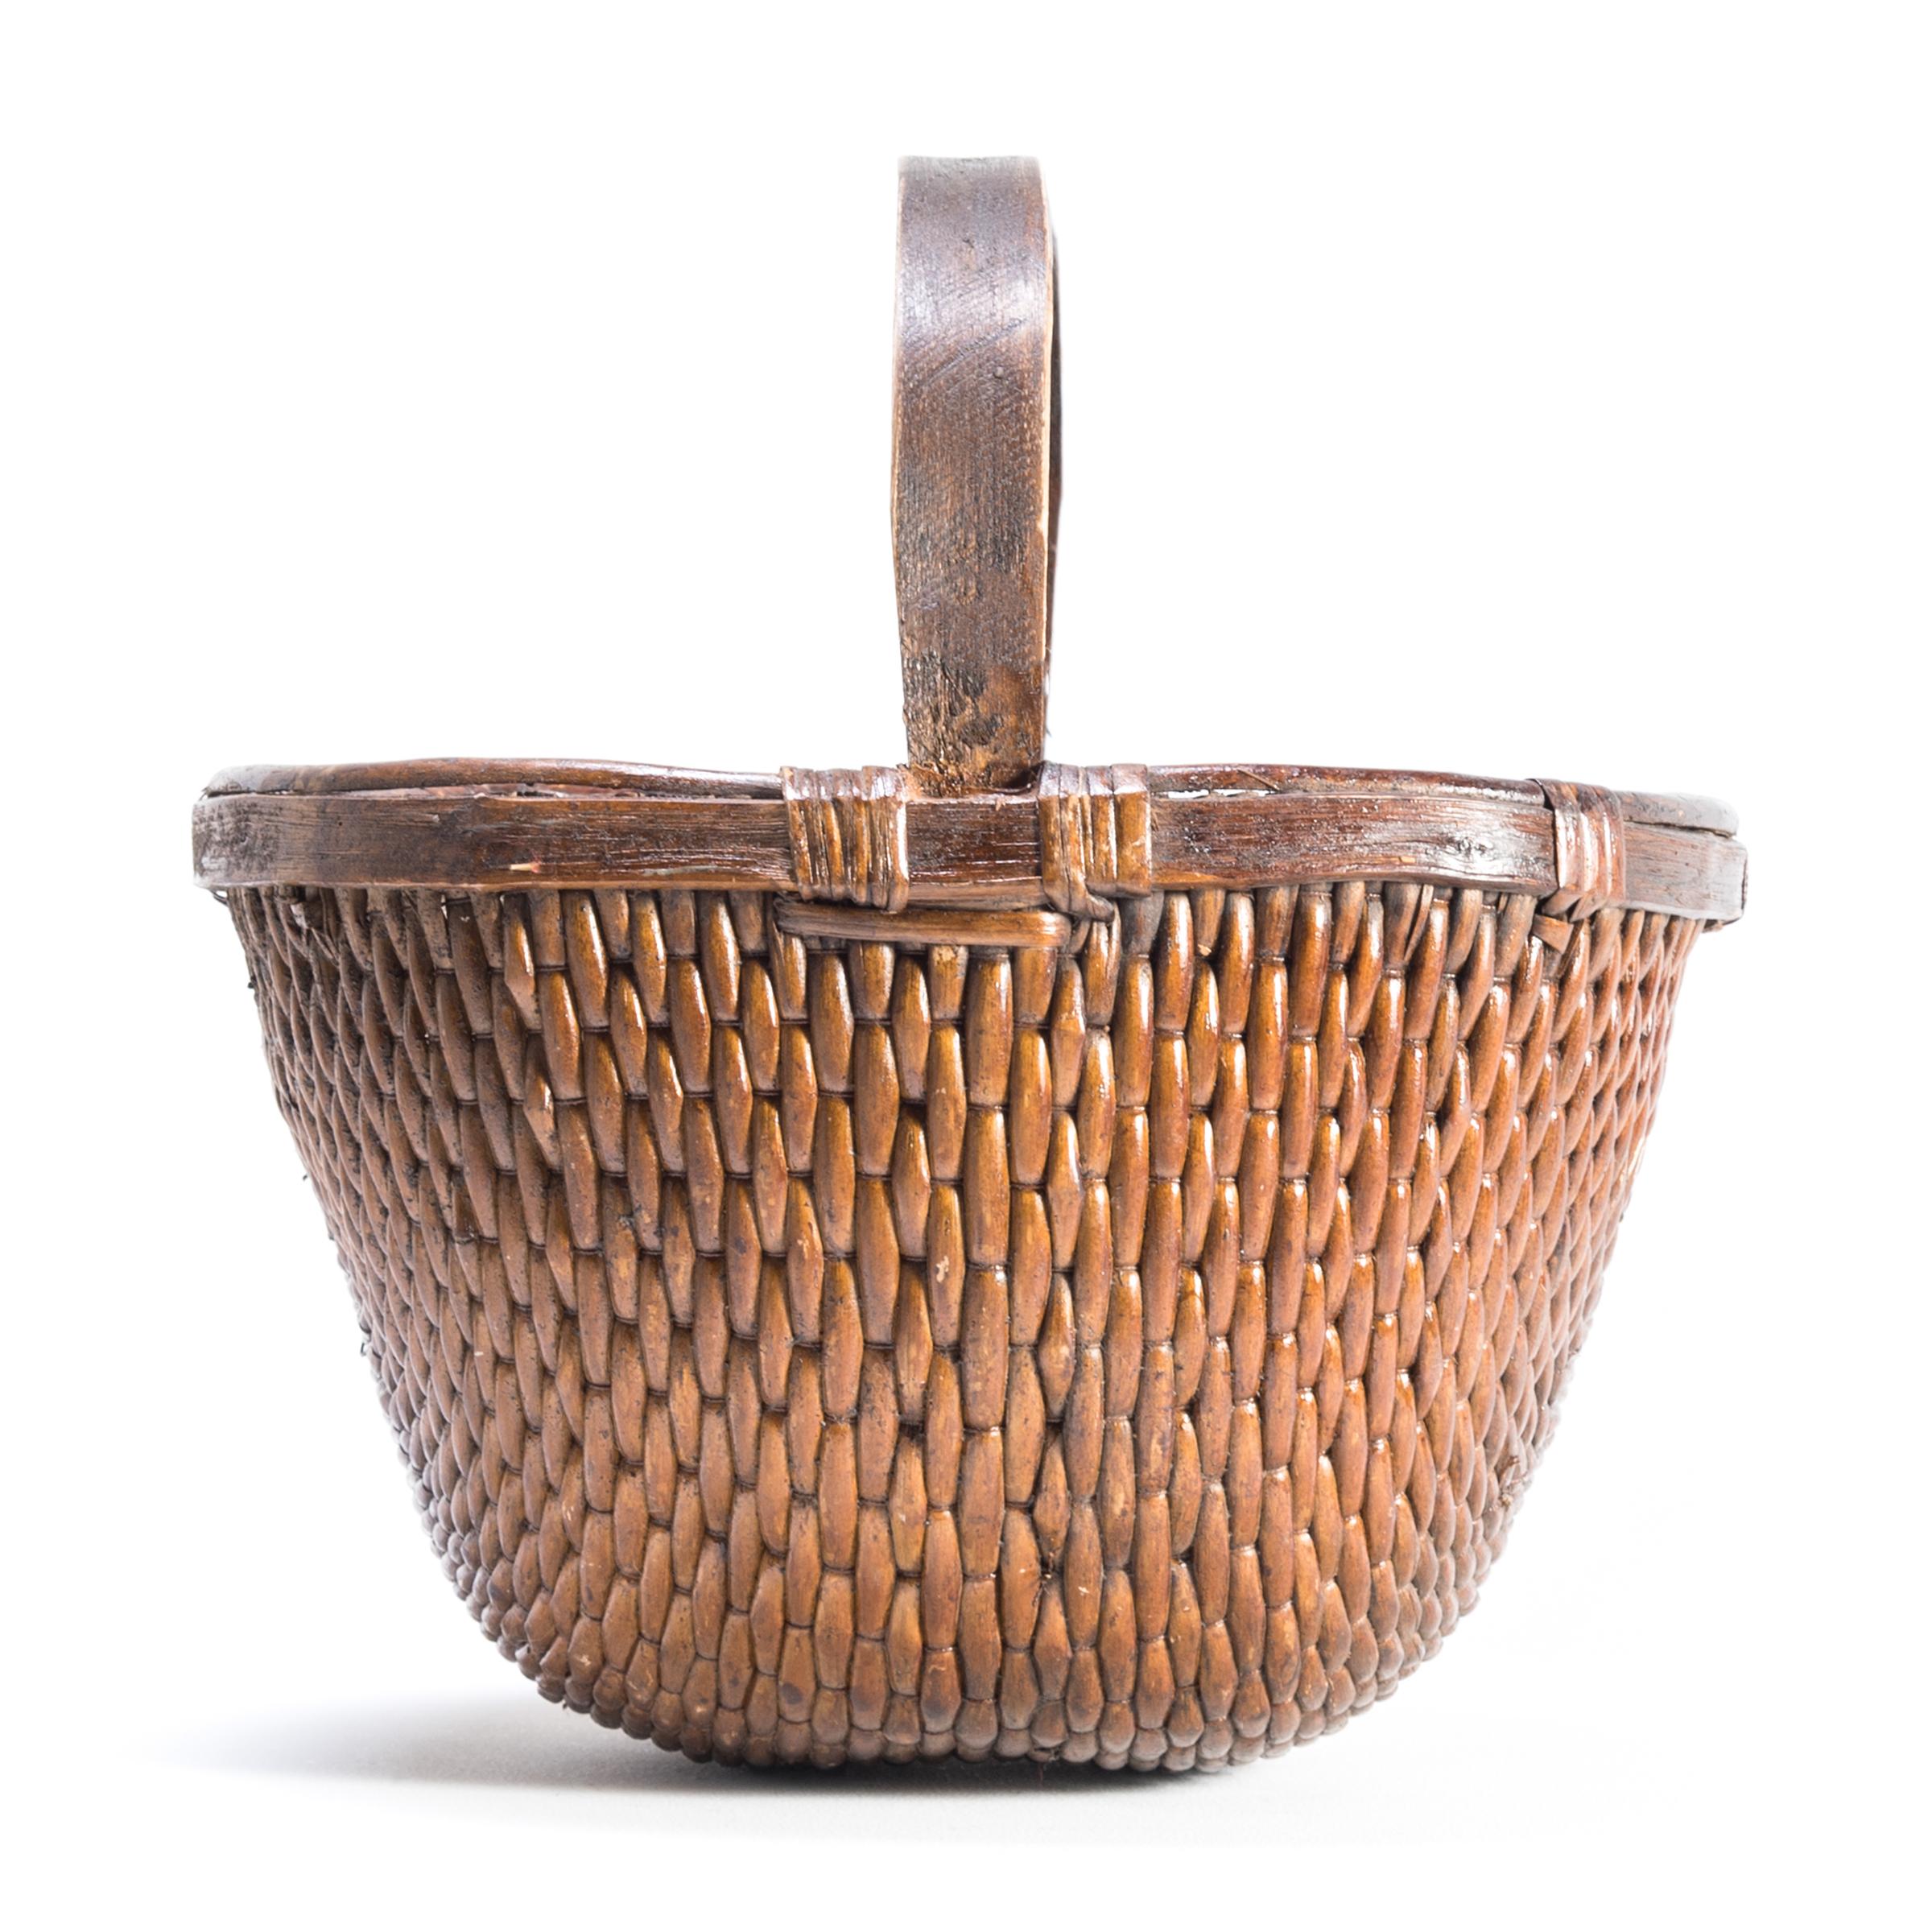 Hand-Woven Chinese Willow Market Basket, circa 1900